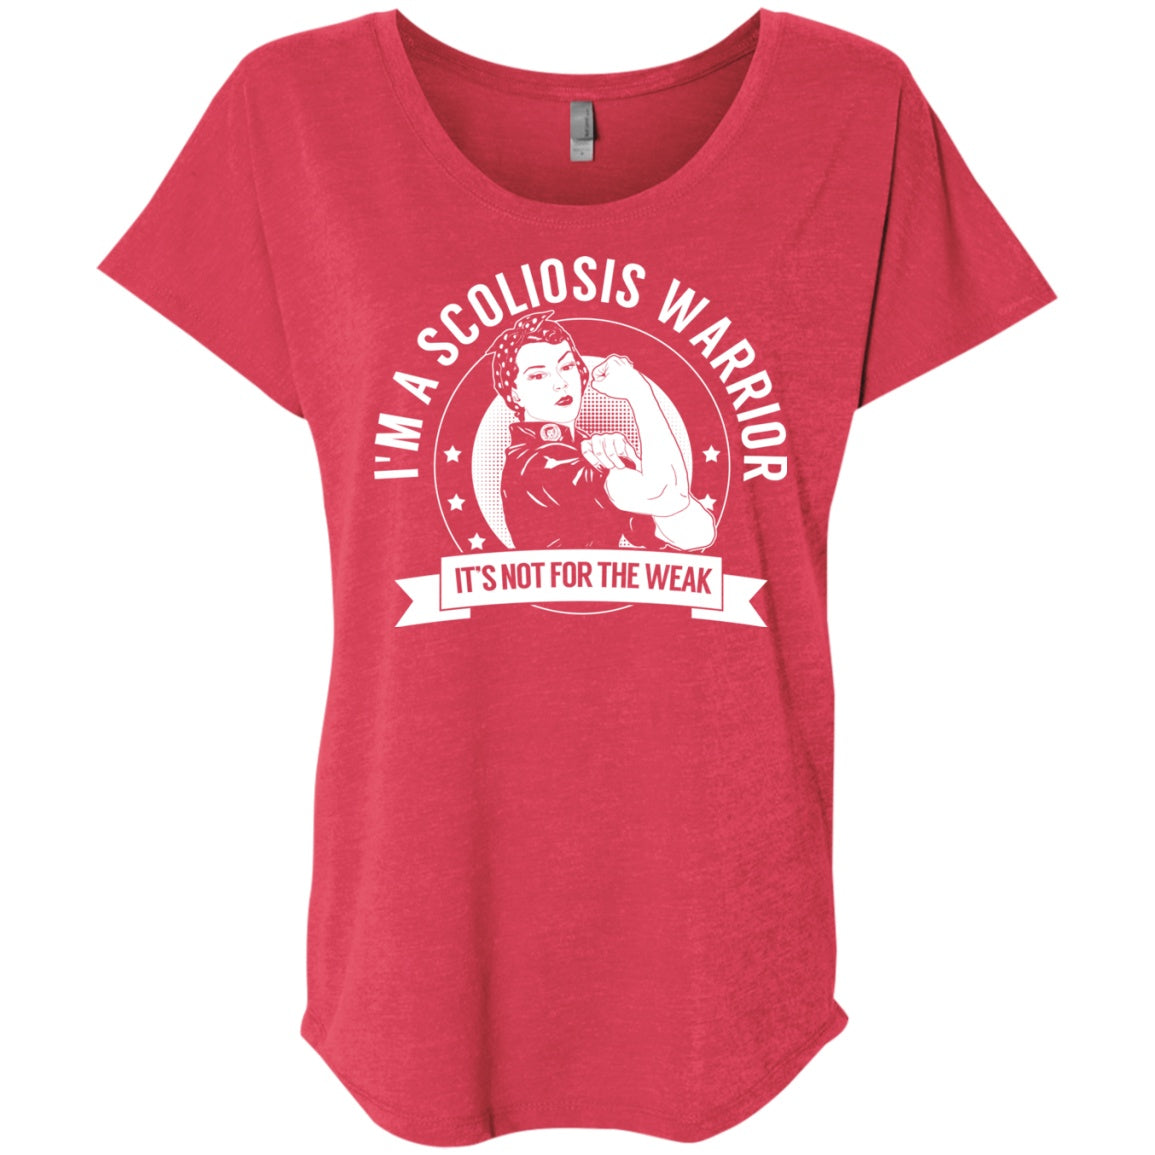 Scoliosis Warrior Not For The Weak Dolman Sleeve - The Unchargeables